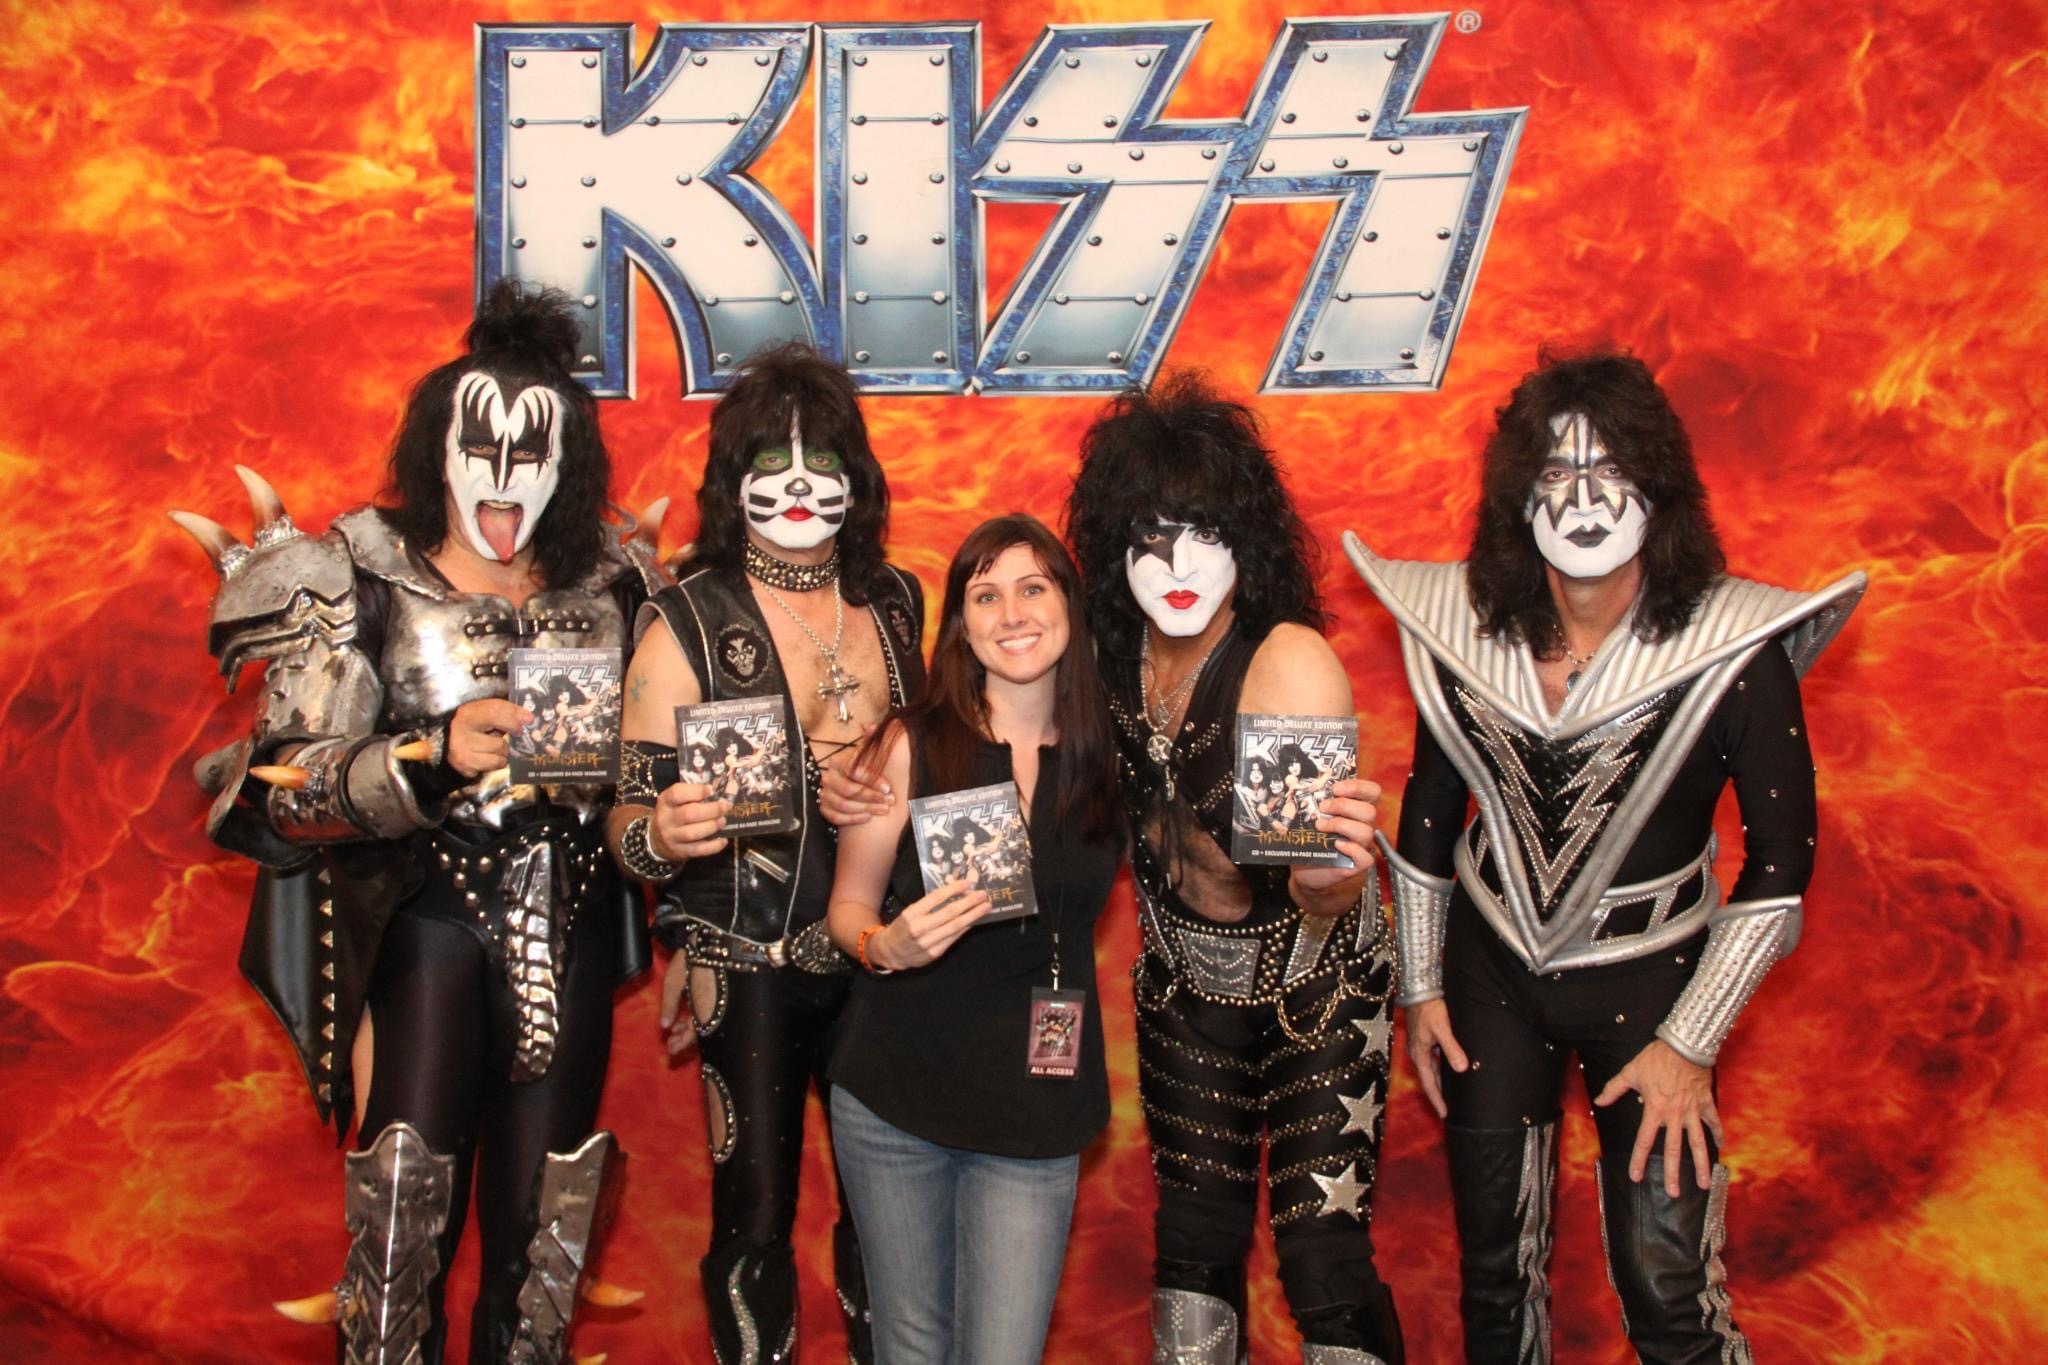 Brittany Hodak with the band KISS working on Zinepak together